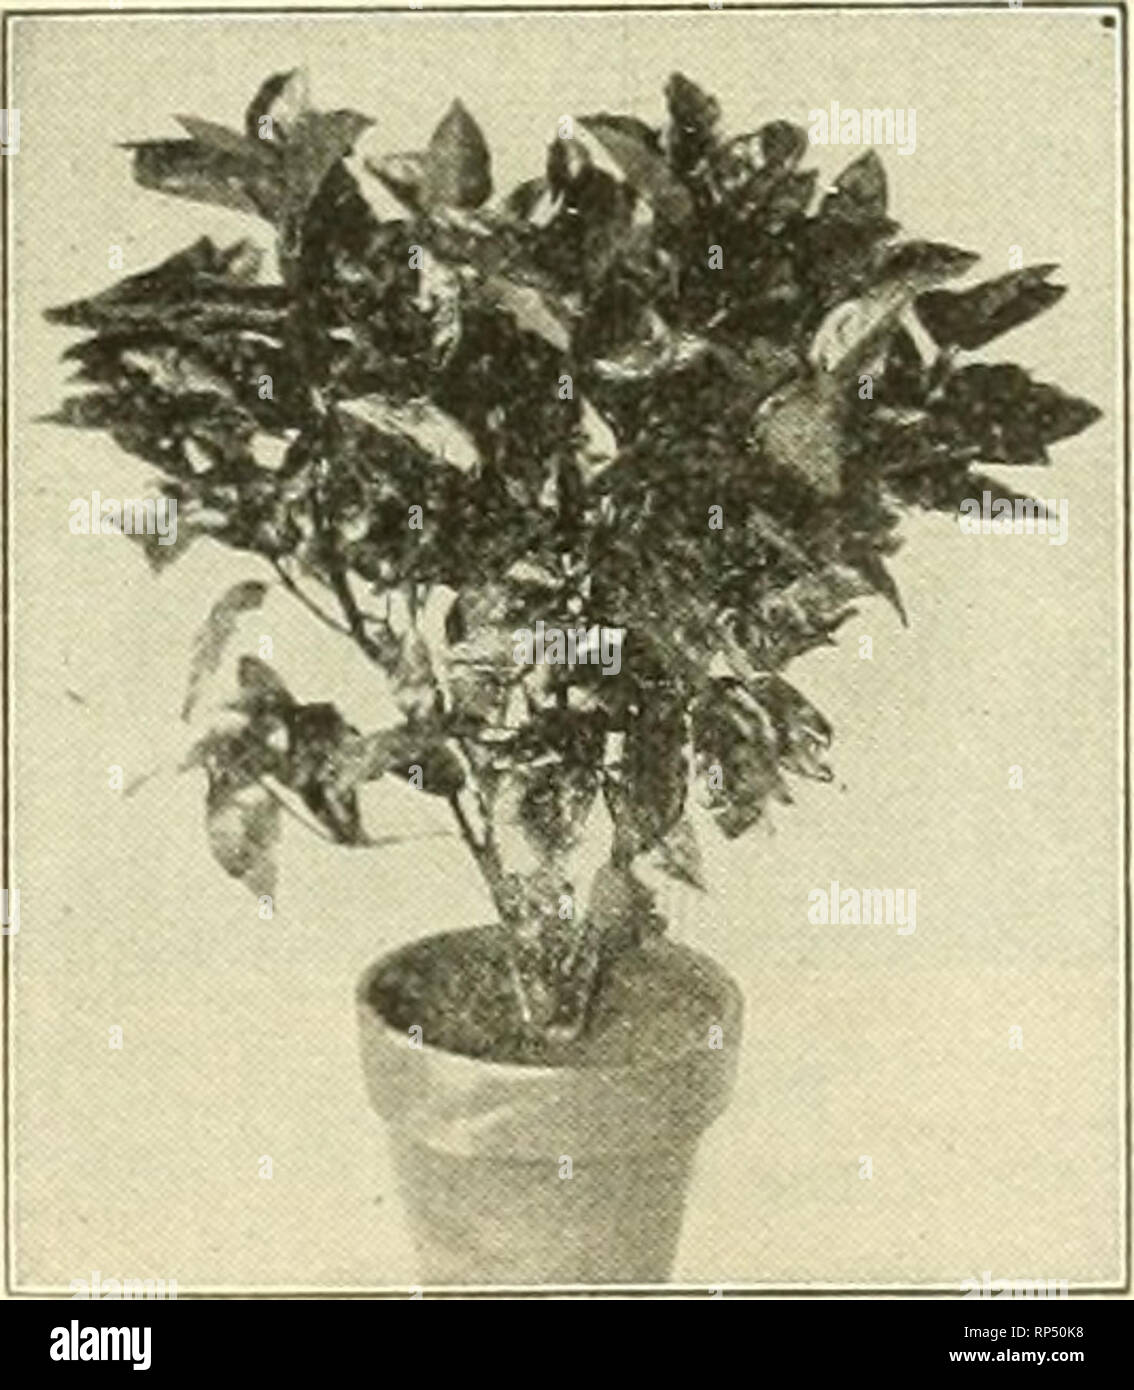 . The American florist : a weekly journal for the trade. Floriculture; Florists. Boxwood Bushes 10 to 12 inches high. $20.00 per 100. 12 inches high, $30.00 per 100. 18 inches high. $50.00 per 100. All fine plants for window boxes or Xmas sales. Araucaria Txcelsa. Norfolk island Si.^e Tiers Height iPer doz. 4-in. pots 2 and 3 .. S to 10 in $ 6 00 5-in. pots 3 and 4... 12 to 14 in 4 00 6 in. pots 4 and 5...IS to 20 in 12 00 7-in. pots 4 and 5...22 to 24 in 18 00 This is an e.xceptionally good lot. and we can give you good value. Asparagus Scandens Deflexus 4-in. pots $2 00 per do?. This is espe Stock Photo